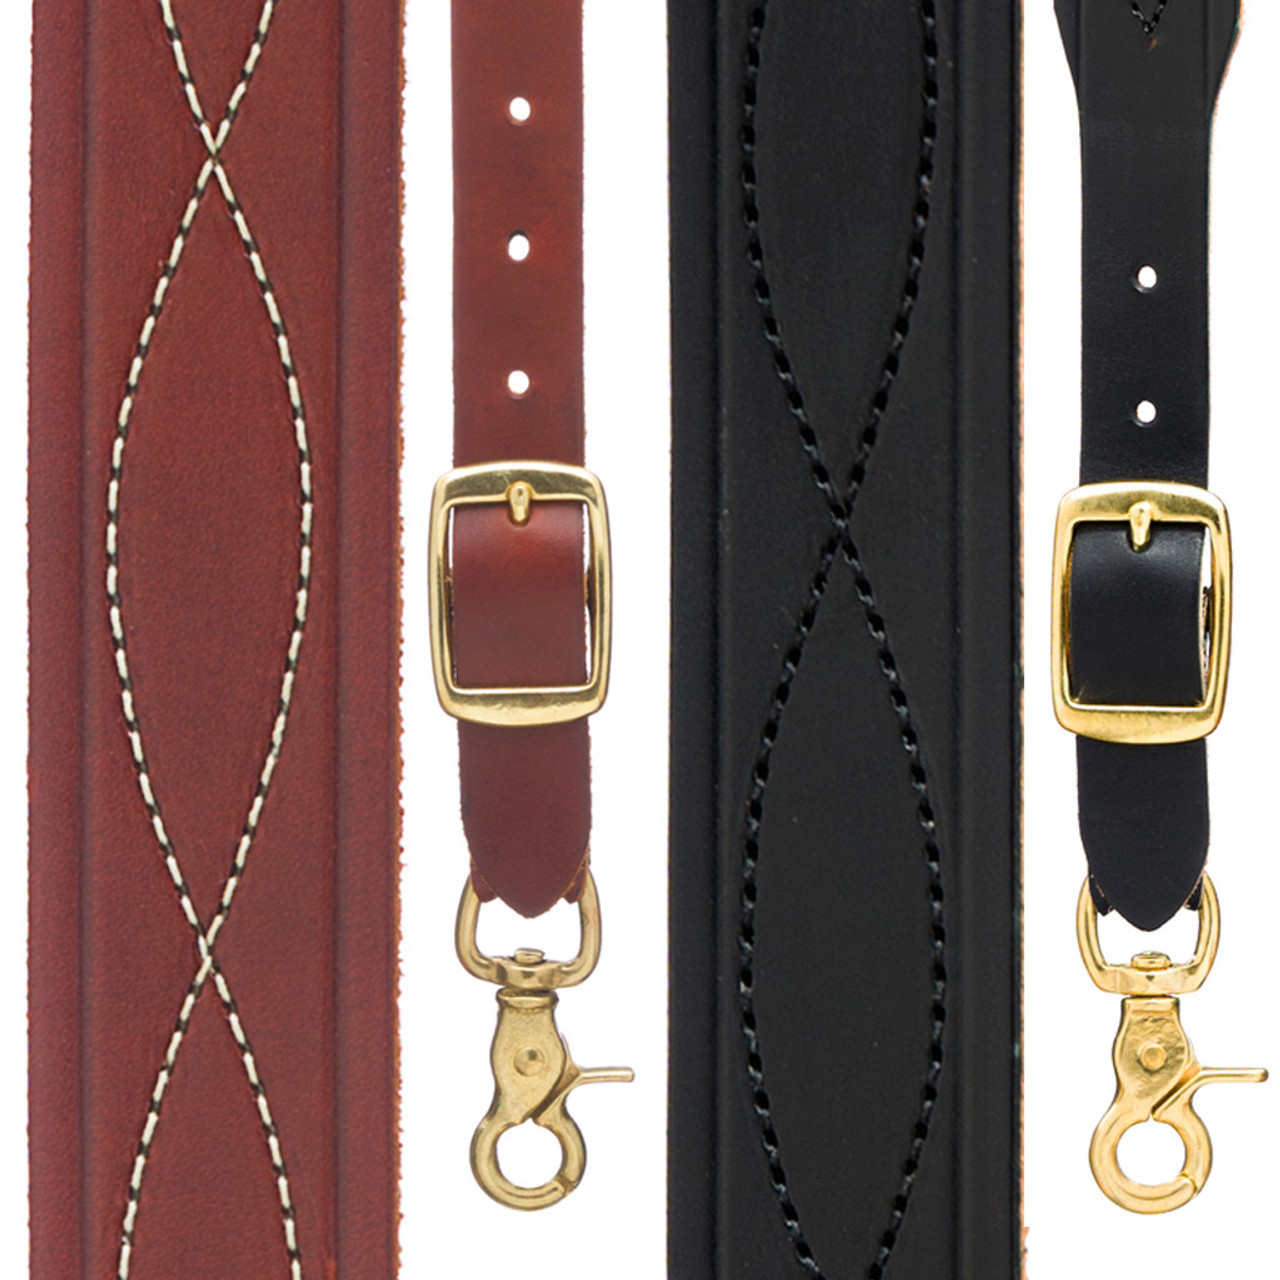 Western Leather Chain Stitched Suspenders - 2 Colors